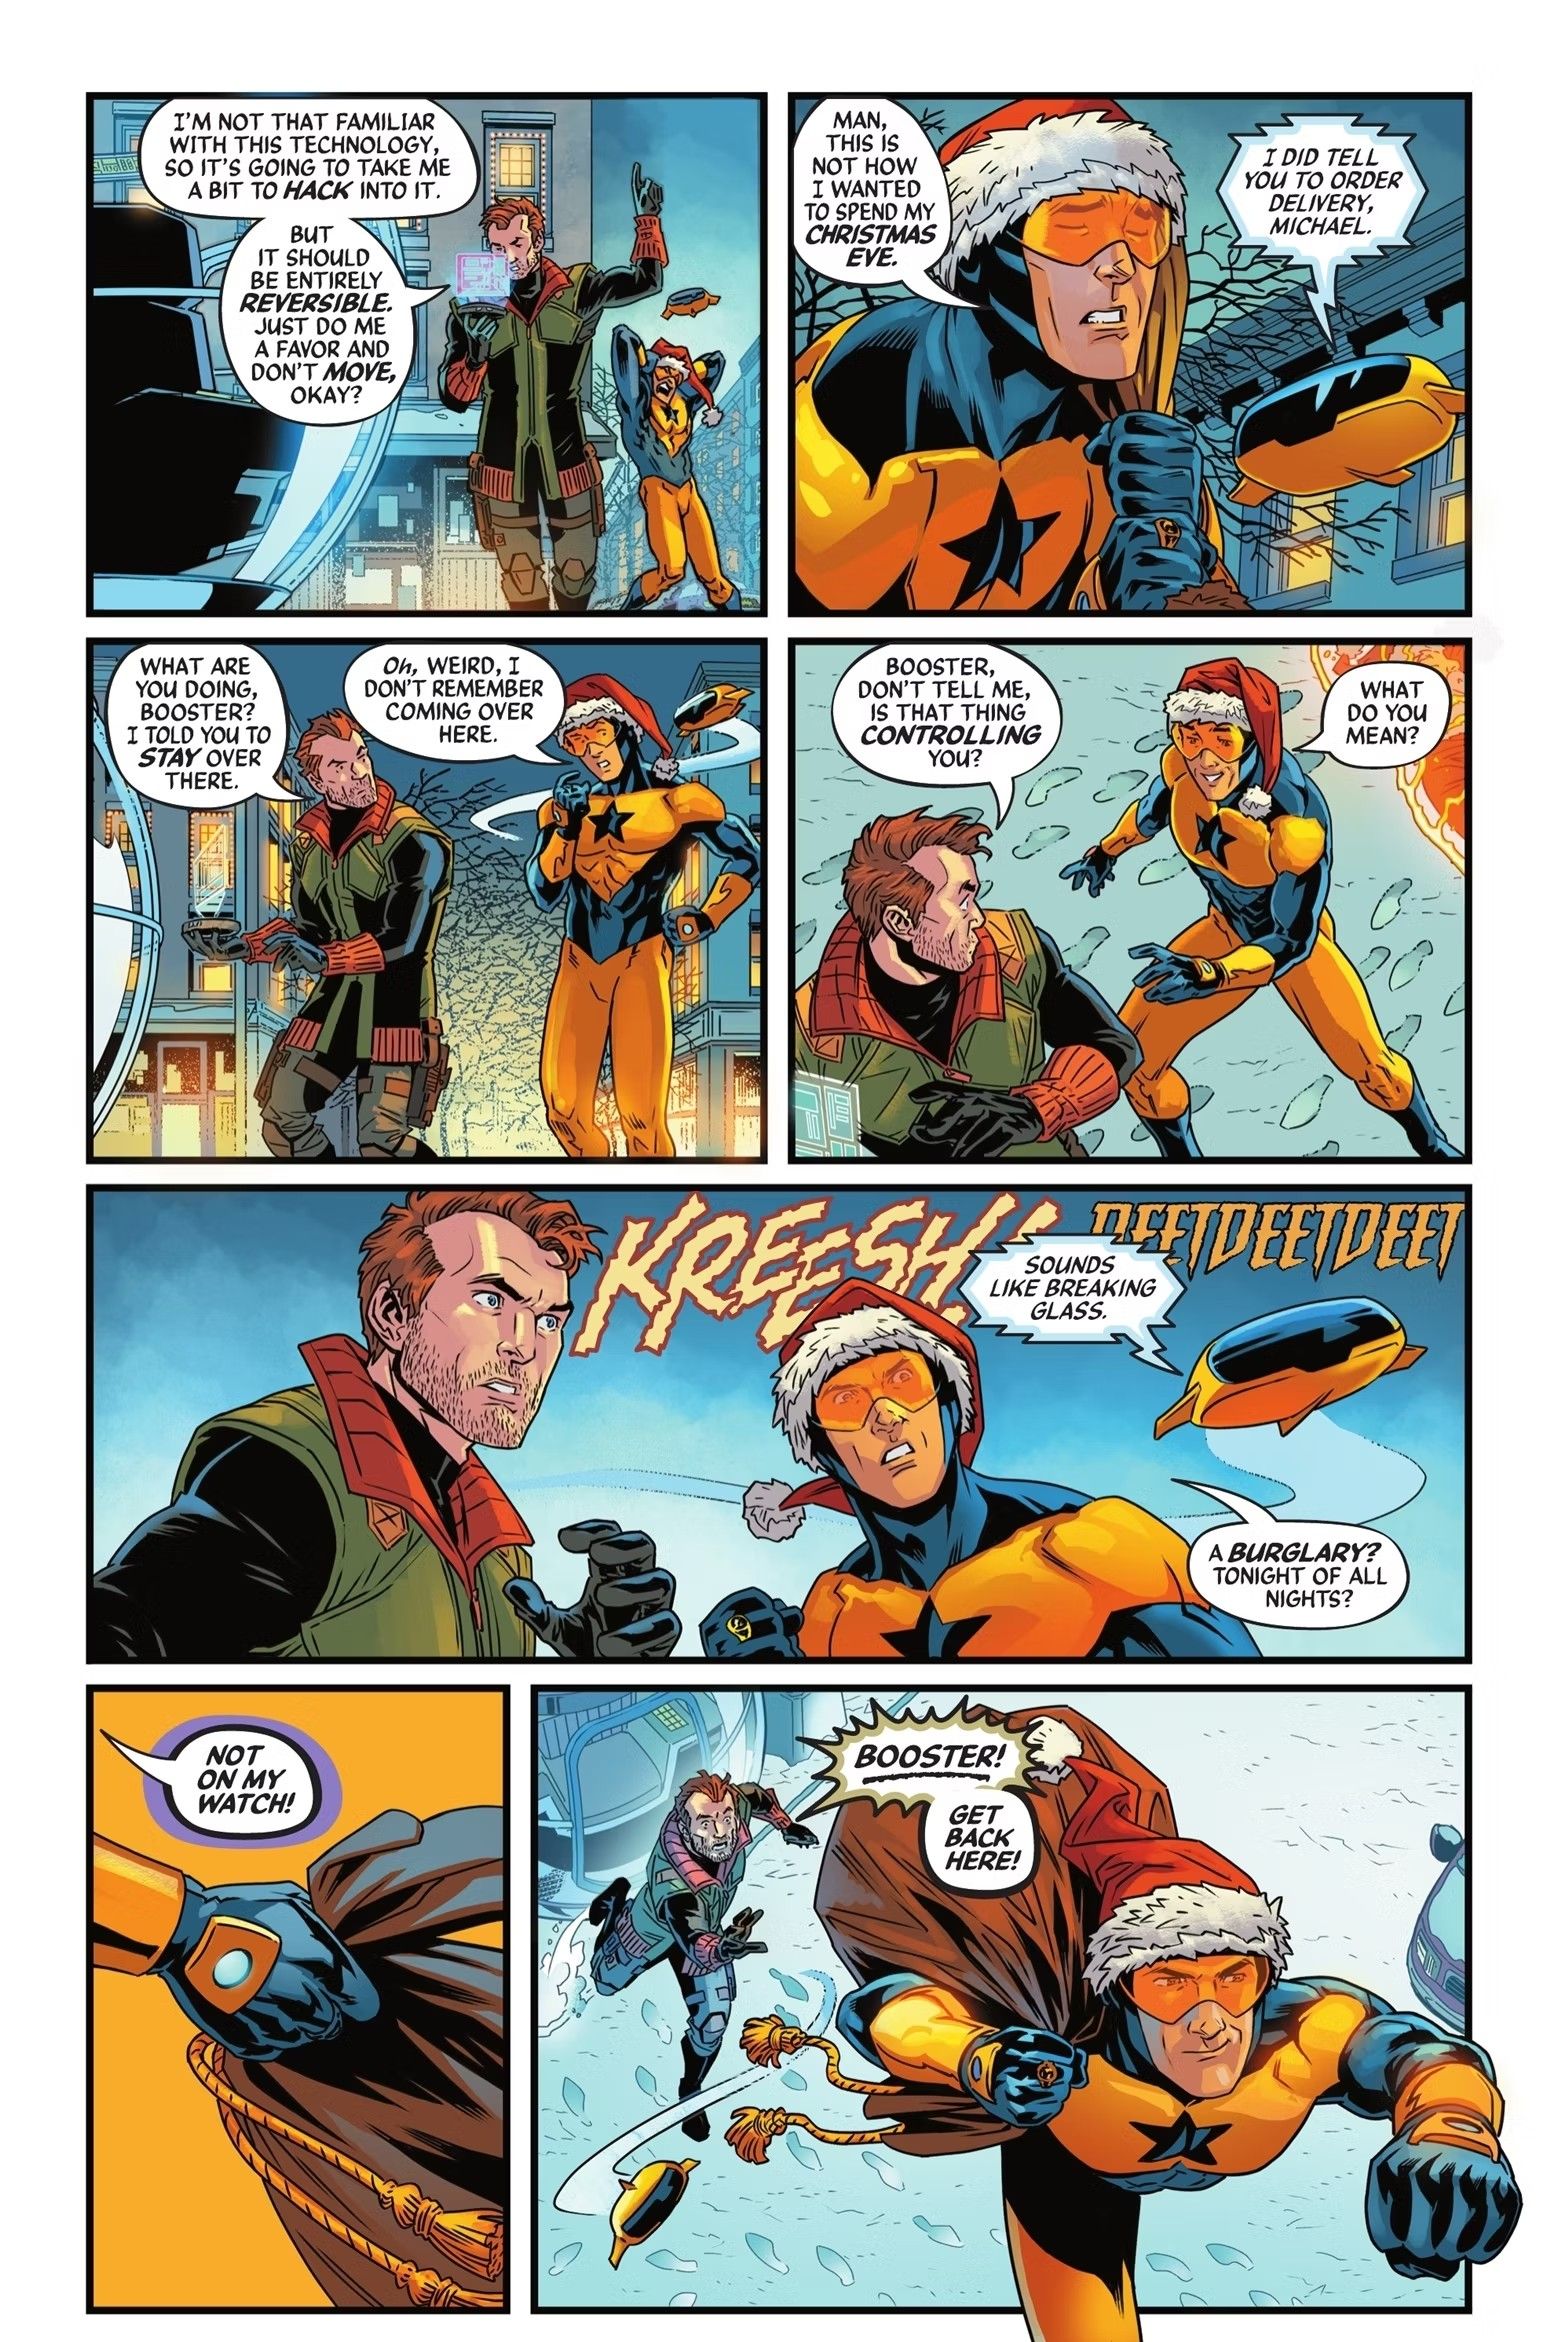 booster gold becomes santa claus flying away in the snow